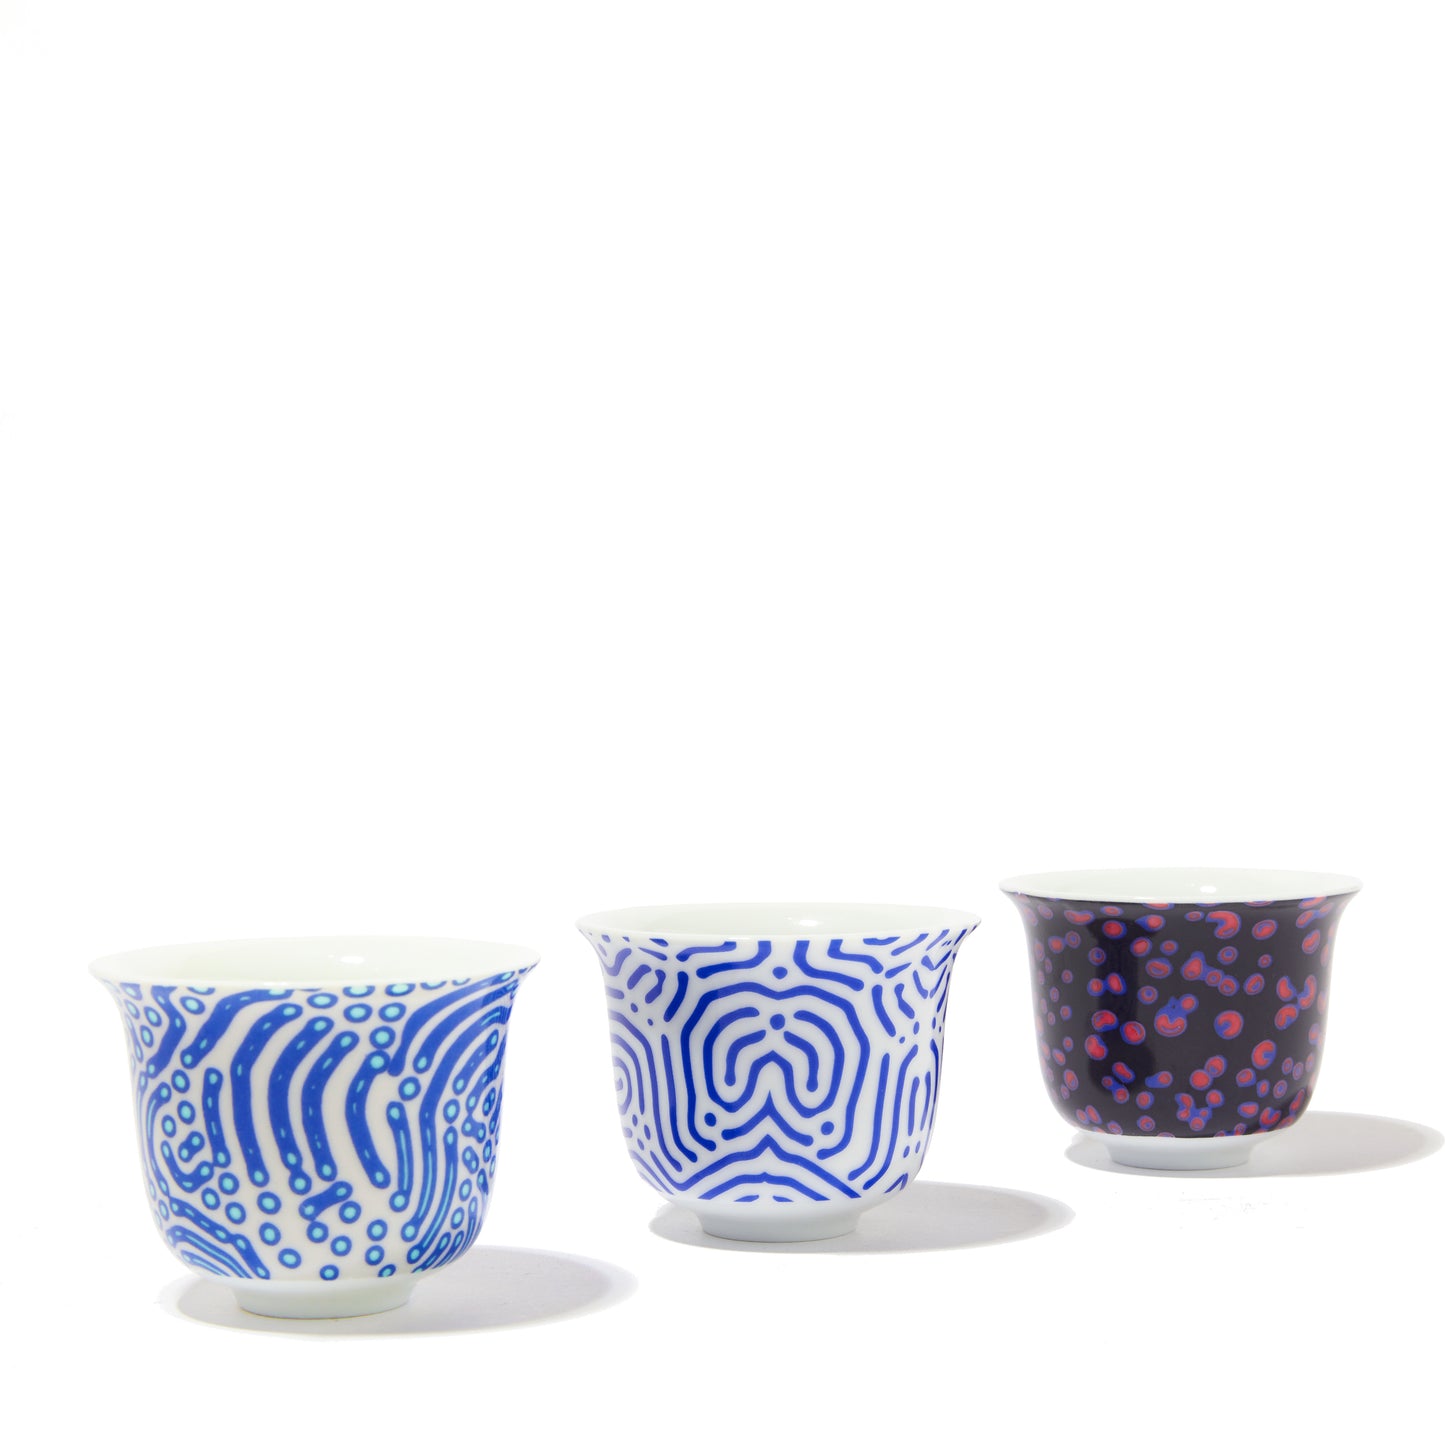 THE OBSERVATORY GAHWA COFFEE CUP SET OF 3